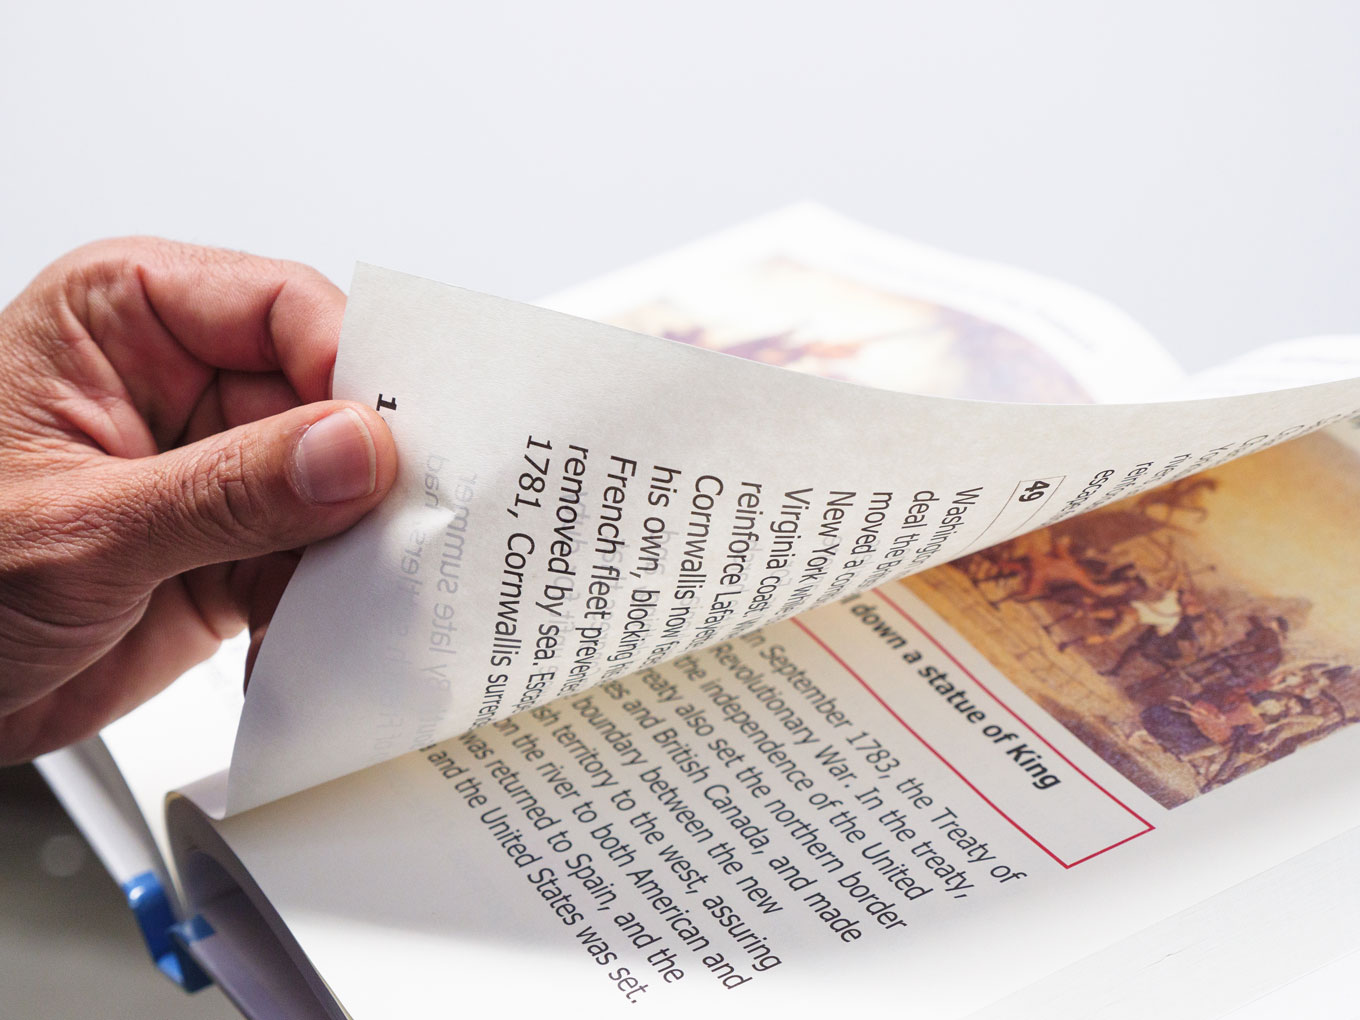 A hand turning the large print page of a book.